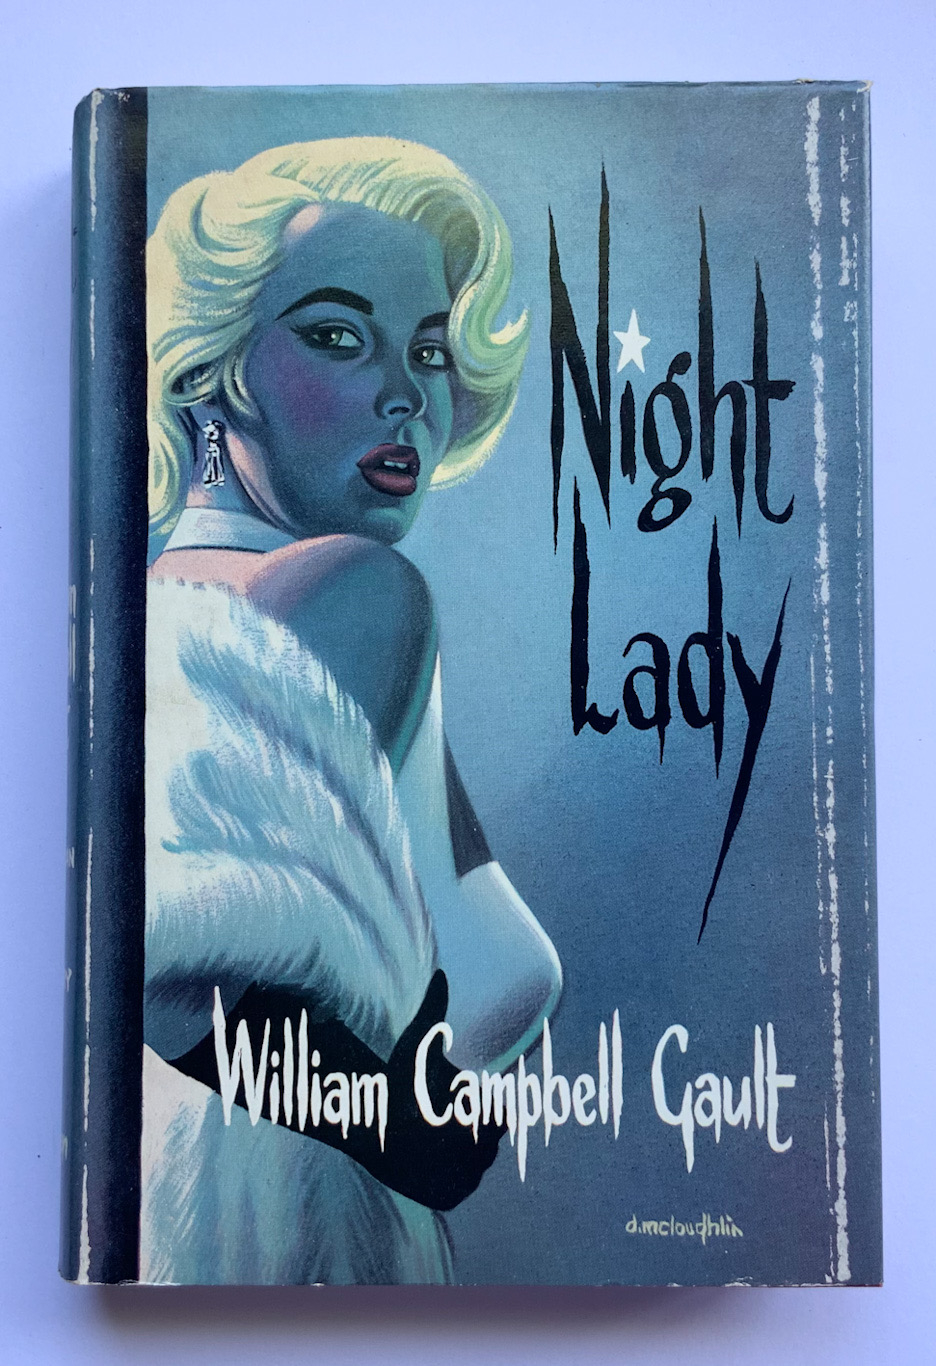 NIGHT LADY British crime book by William Campbell Gault 1960